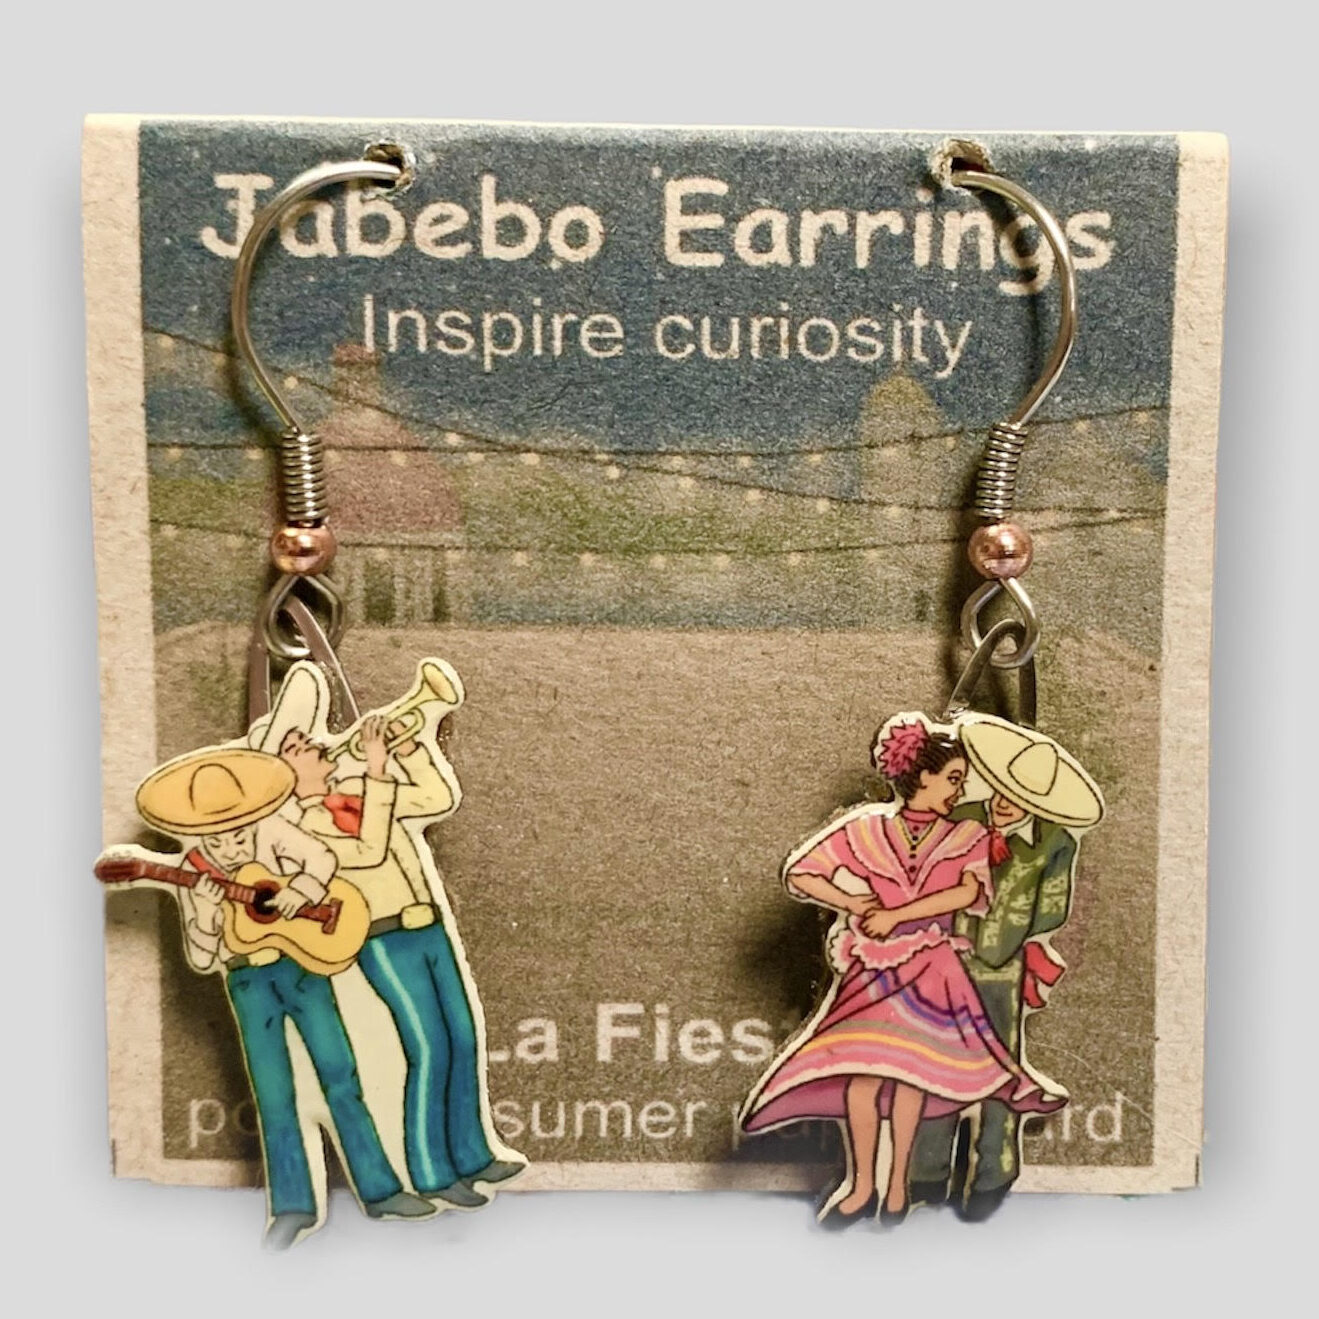 Picture shown is of 1 inch tall pair of earrings of La Fiesta.